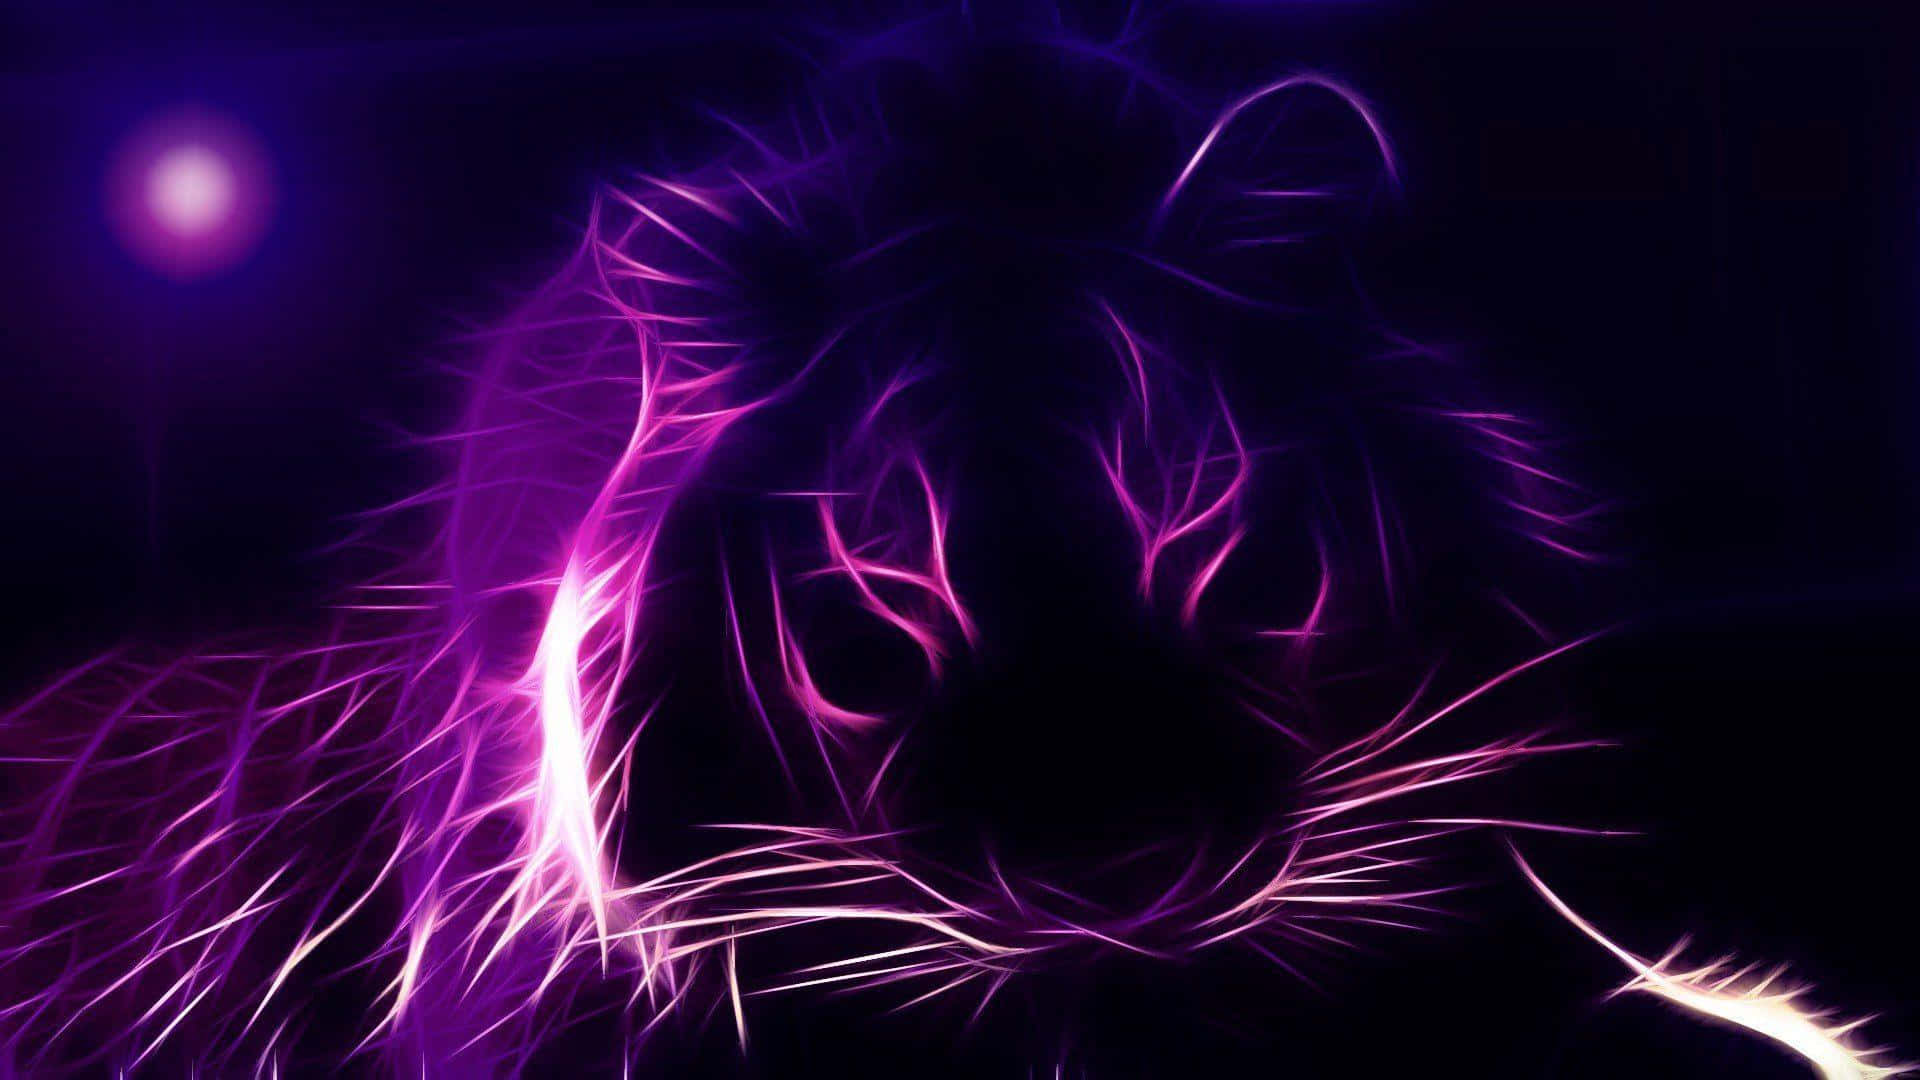 Up your game with this cutting-edge Purple Neon Aesthetic Computer. Wallpaper